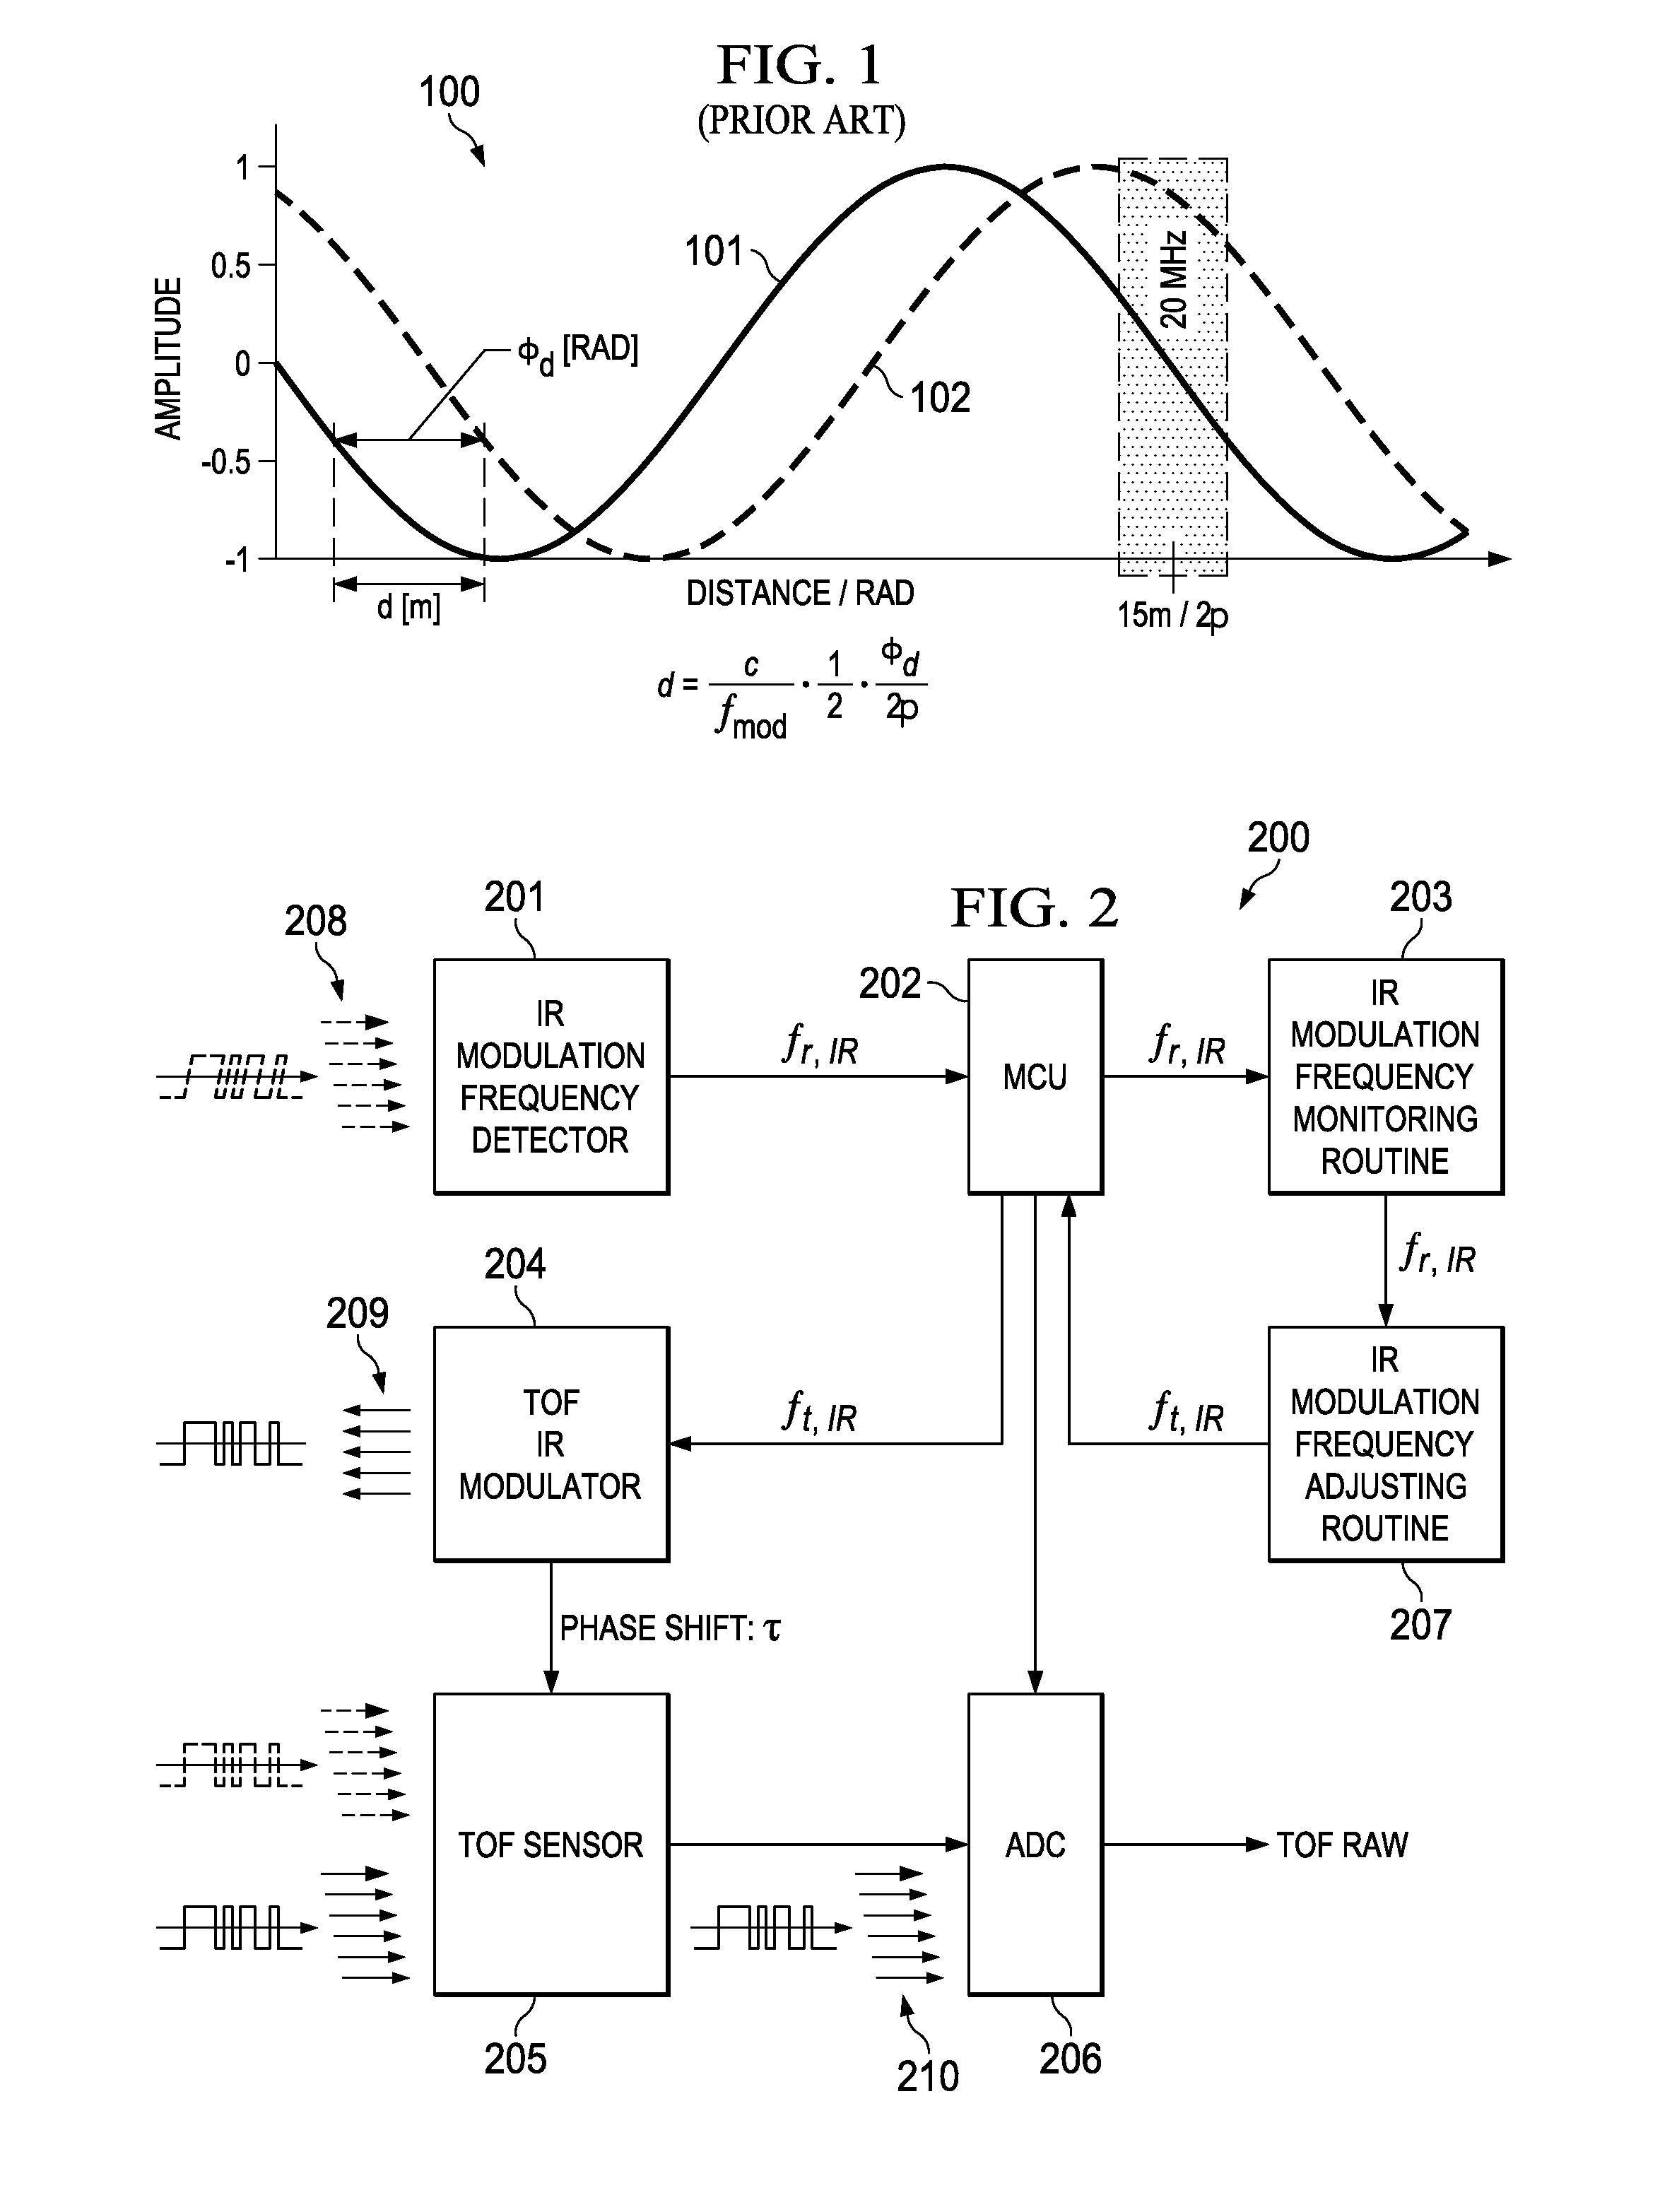 Method for dynamically adjusting the operating parameters of a tof camera according to vehicle speed